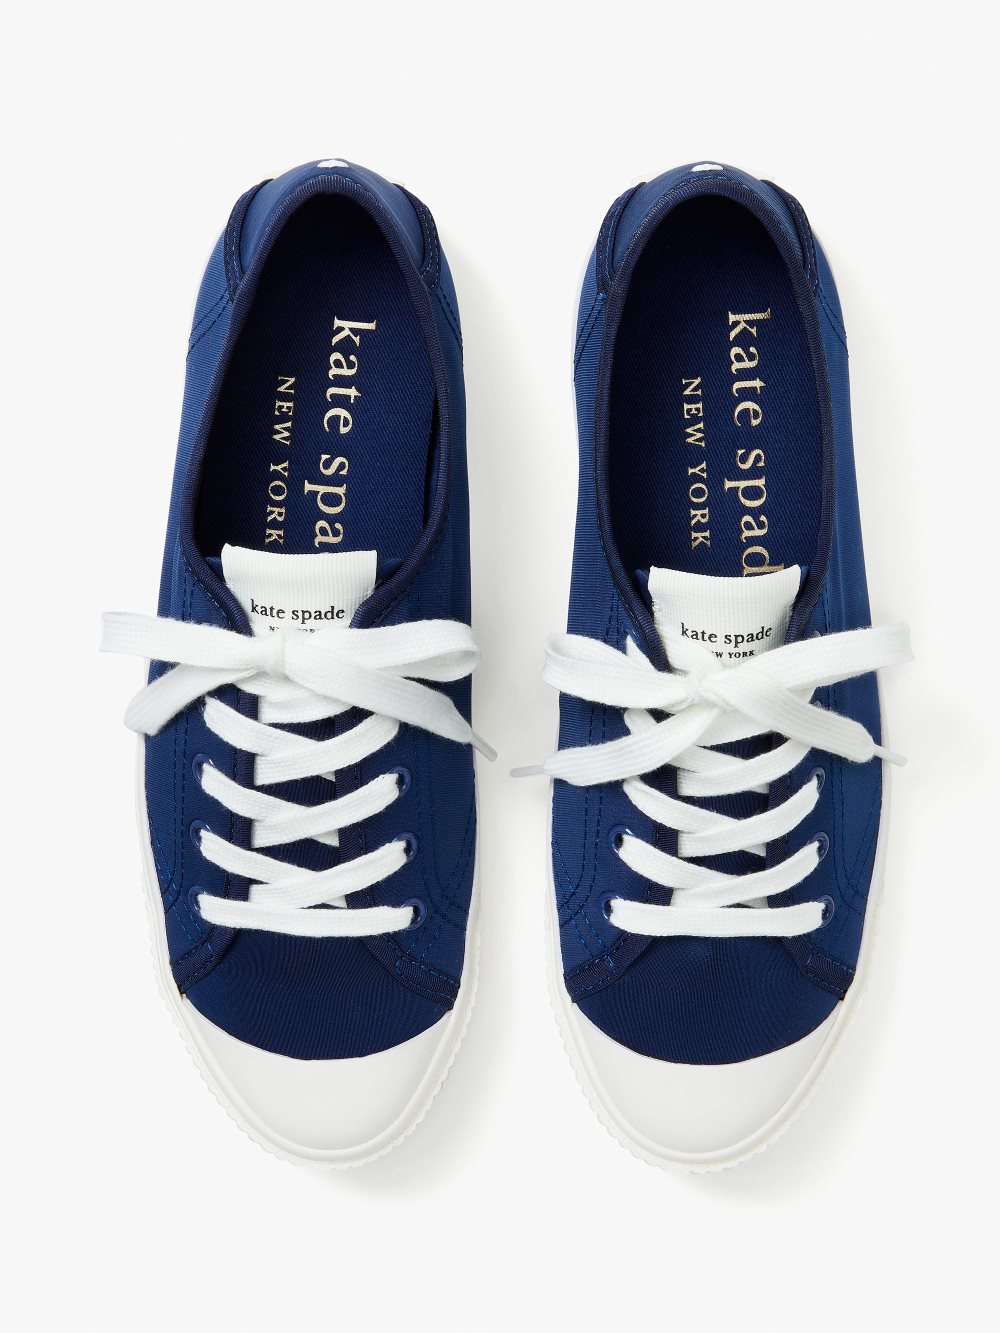 Women's outerspace tennison sneakers | Kate Spade